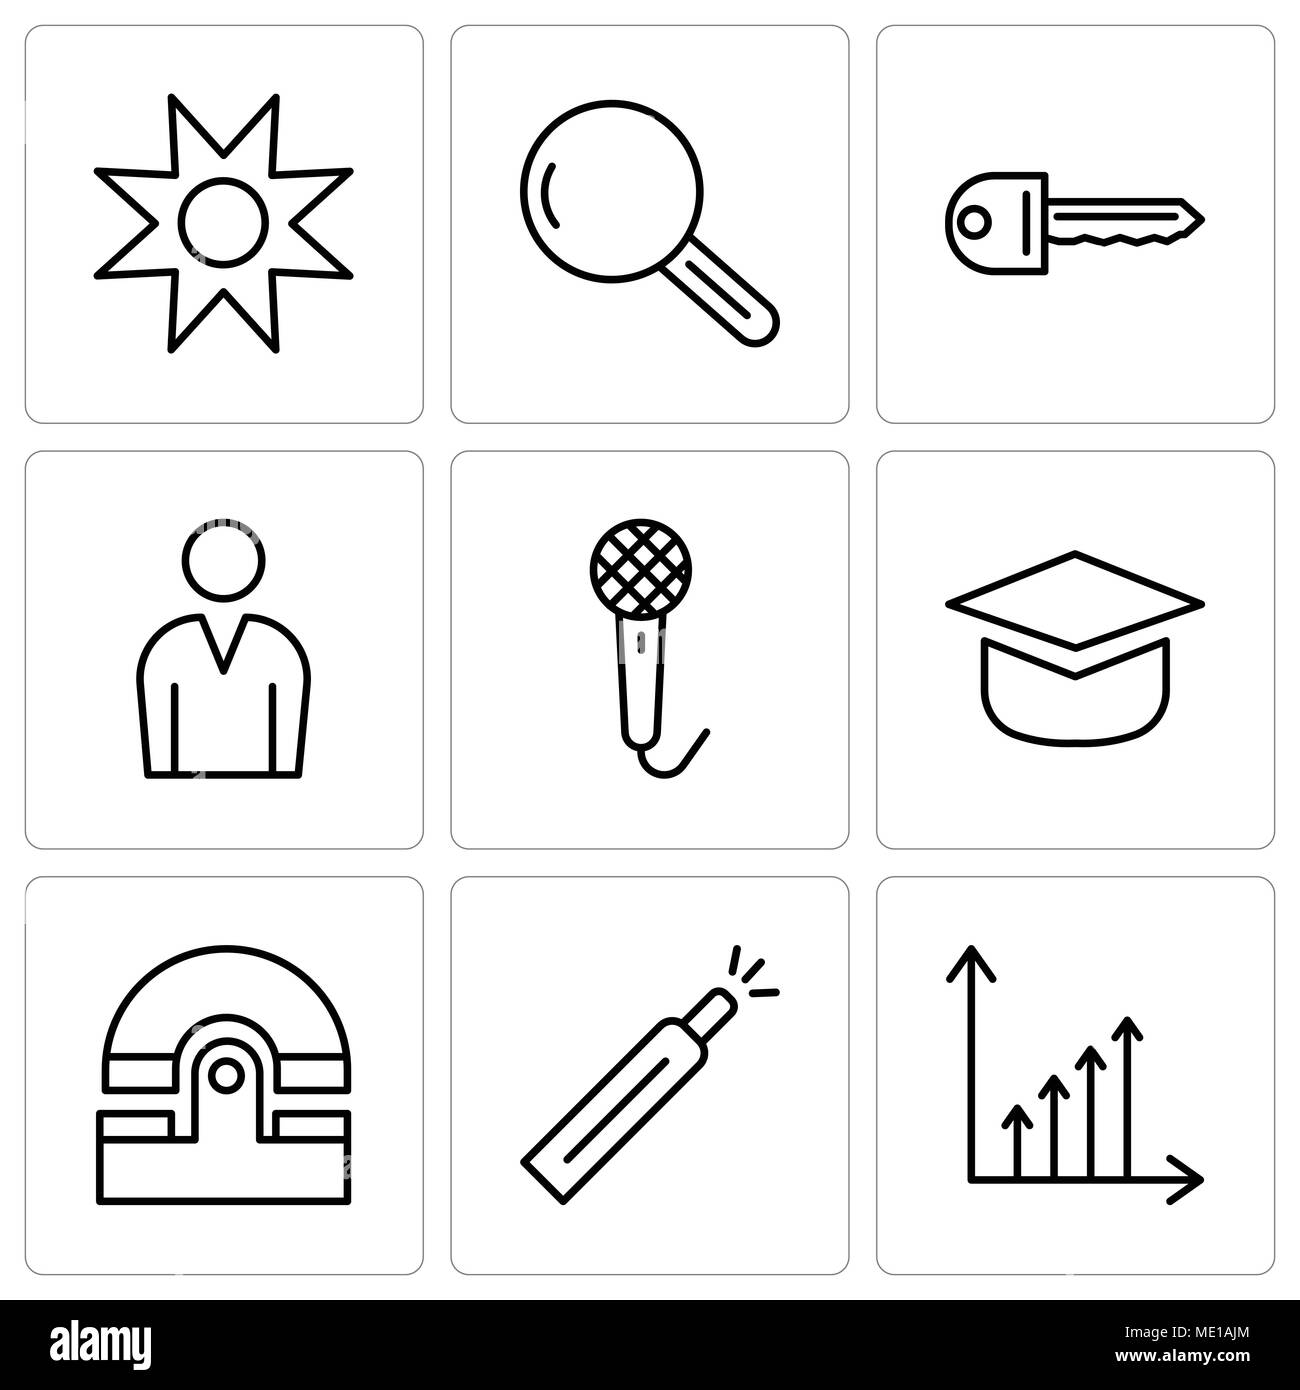 Set Of 9 simple editable icons such as Benefit chart, Battery level, Old phone, Add tool, Voice recorder, Male avatar, Key, Magnifying glass, Star, ca Stock Vector